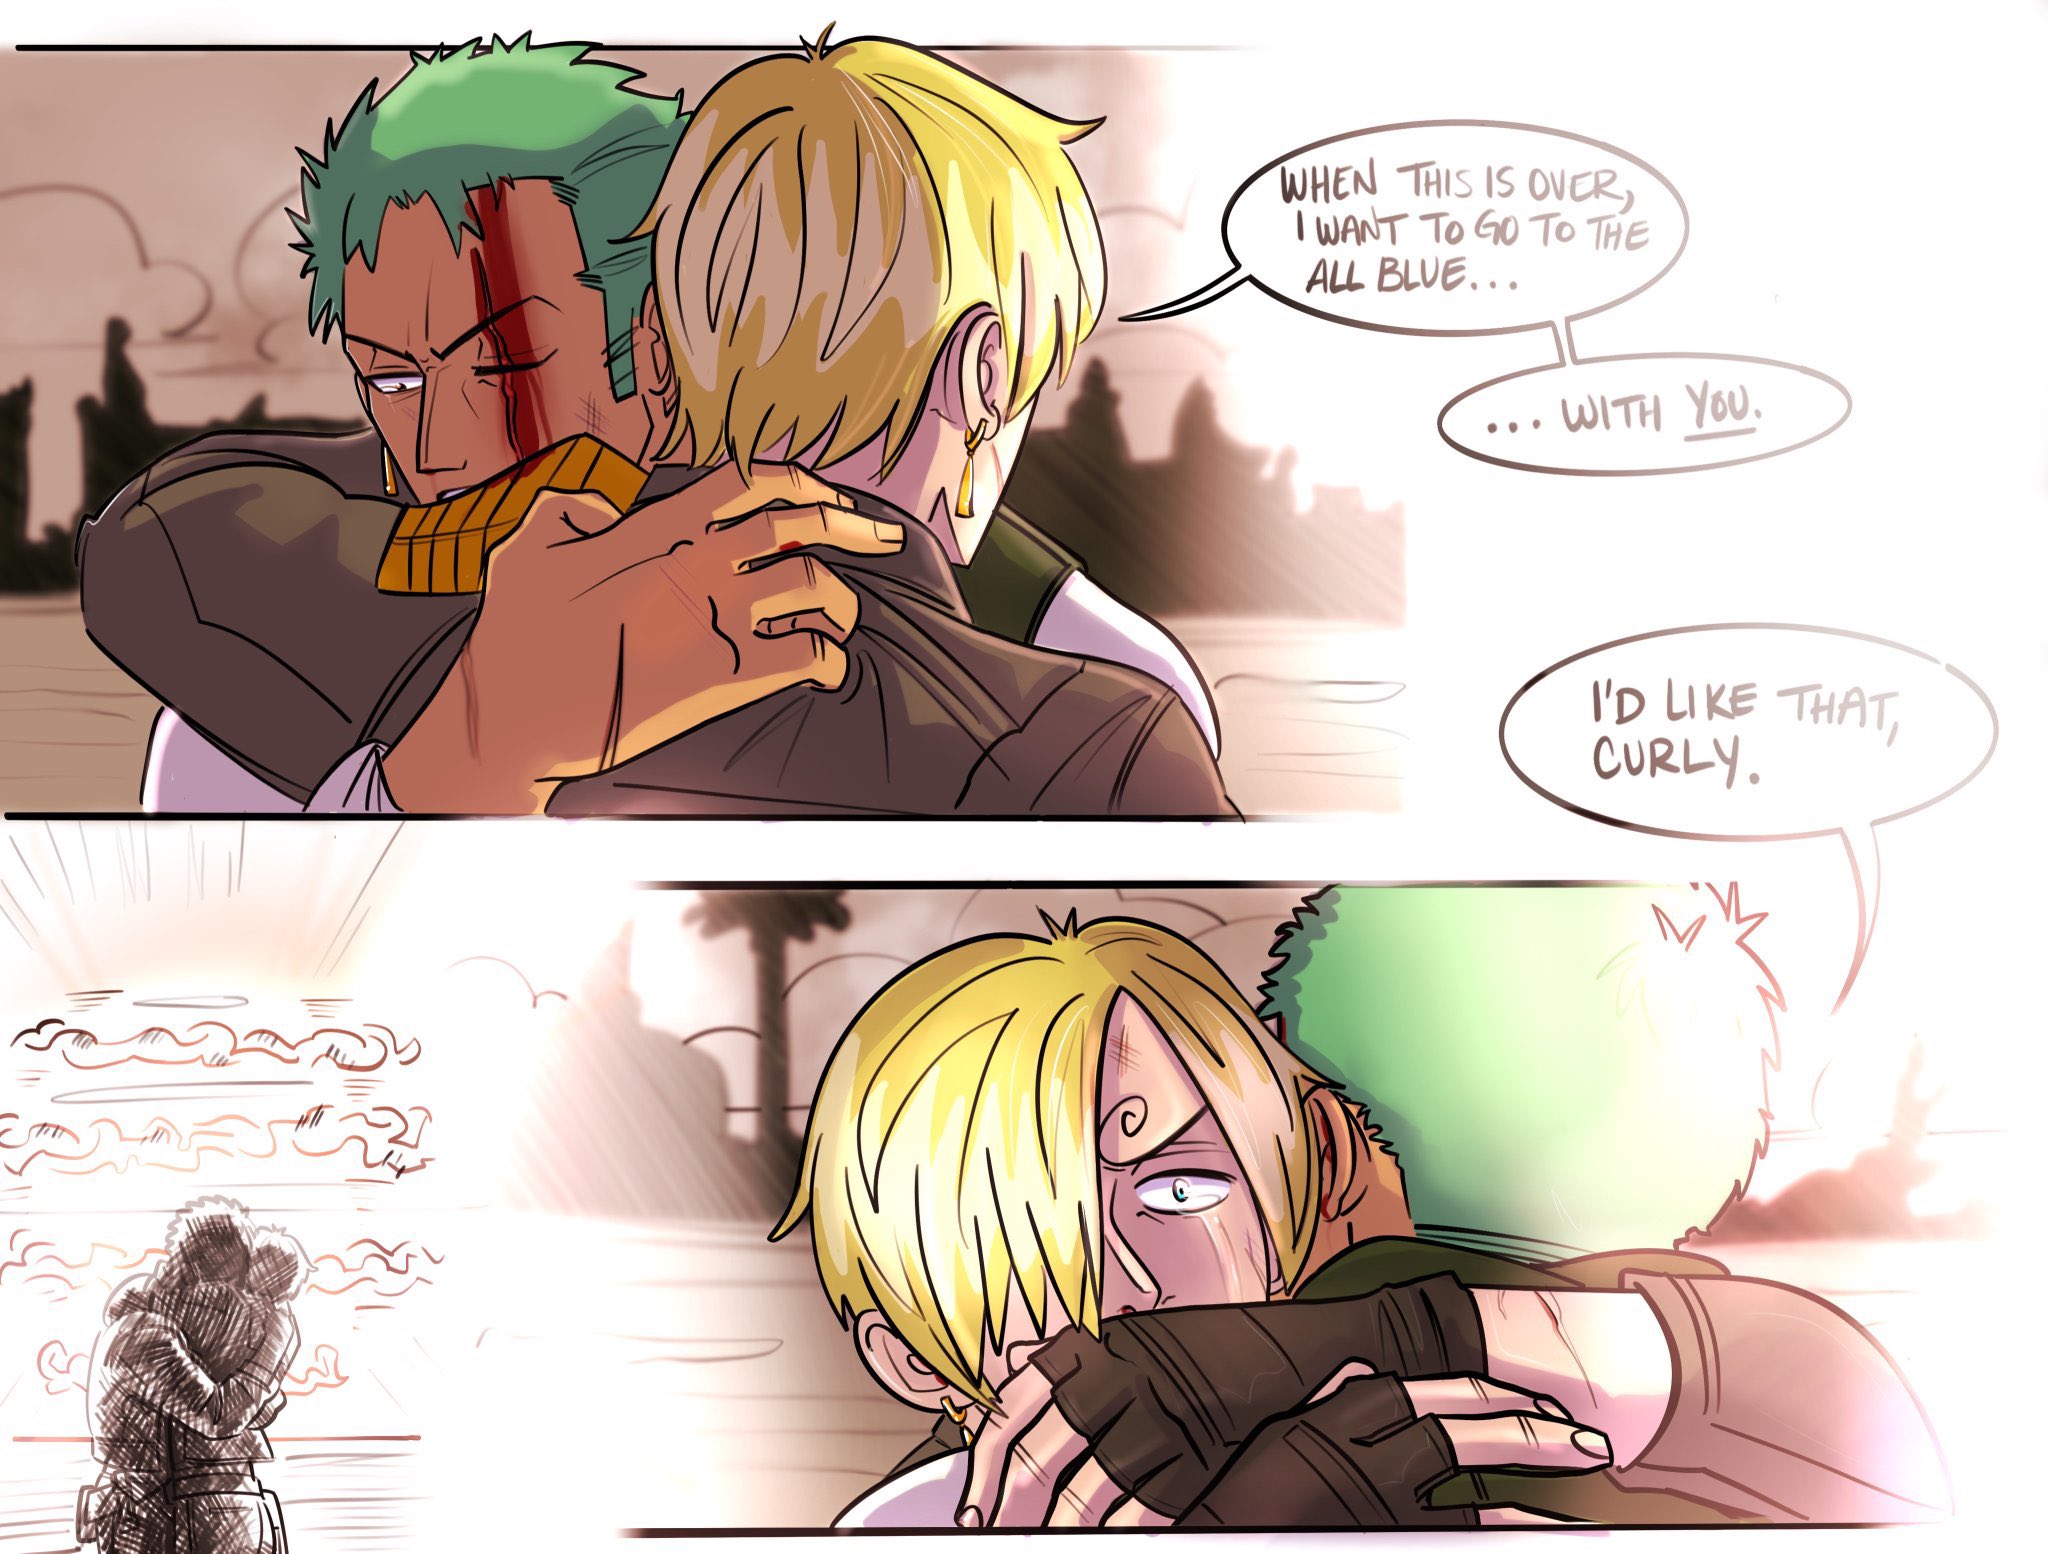 izzy on X: rogue one #zosan in which they promised each other a future but  had to sacrifice it for the good of the galaxy. zoro is satisfied with  having his last